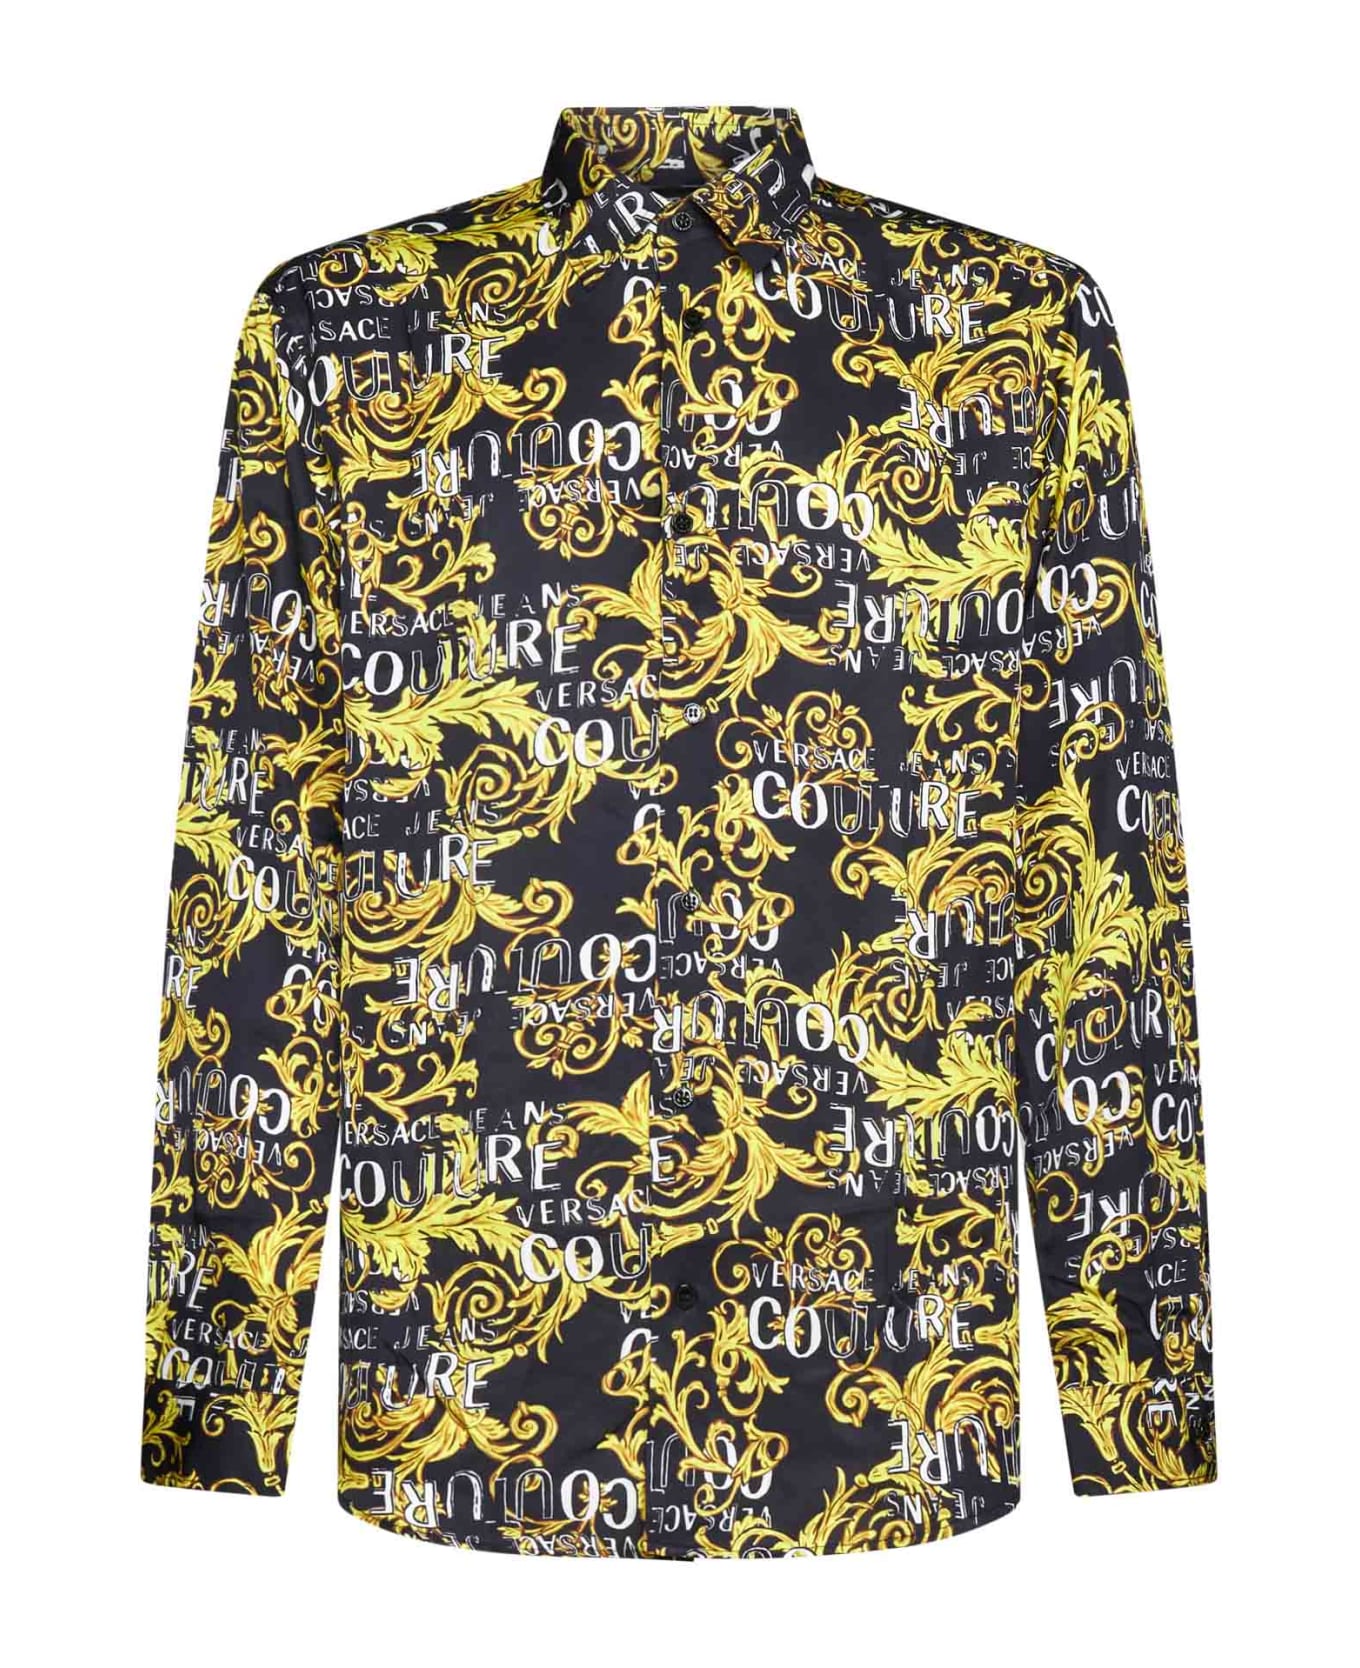 Versace Jeans Couture Shirt - Black gold シャツ